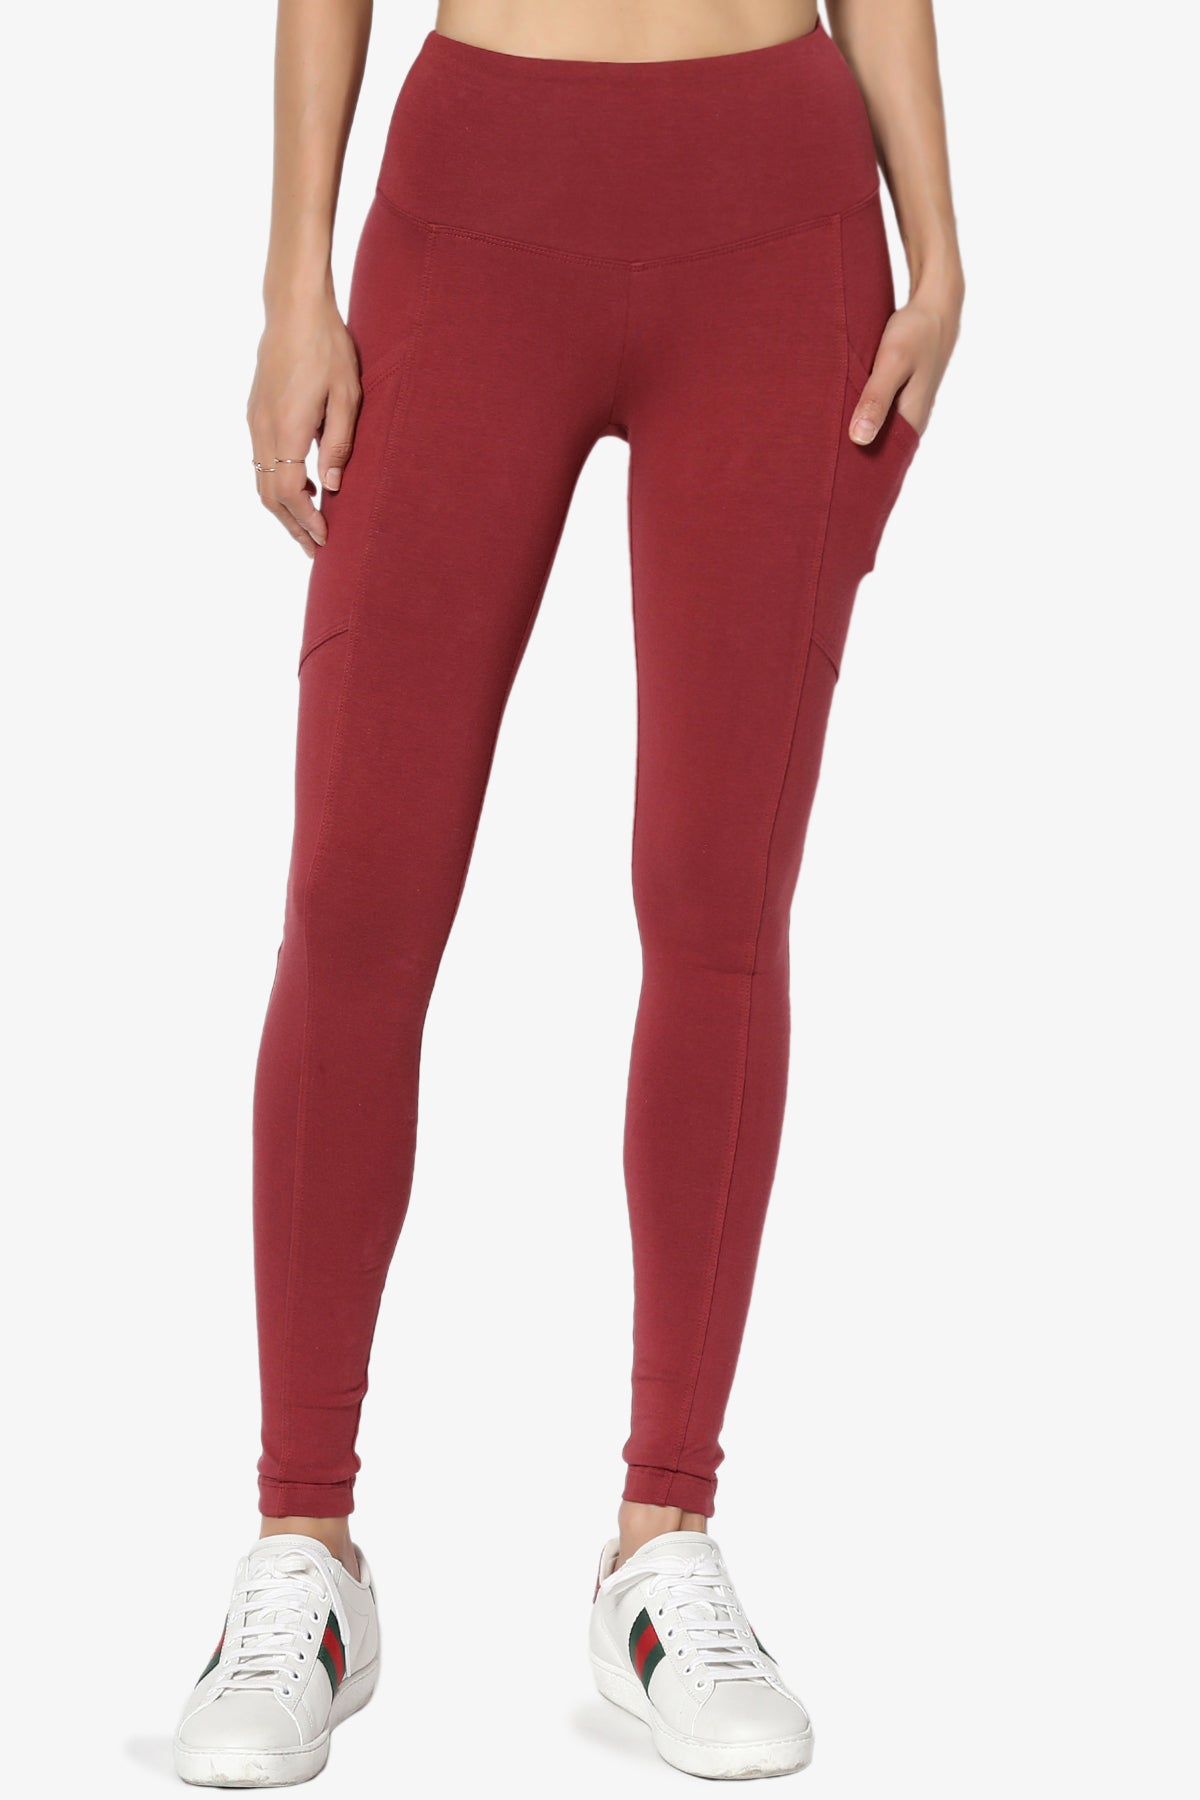 Ansley Luxe Cotton Leggings with Pockets BRICK_3